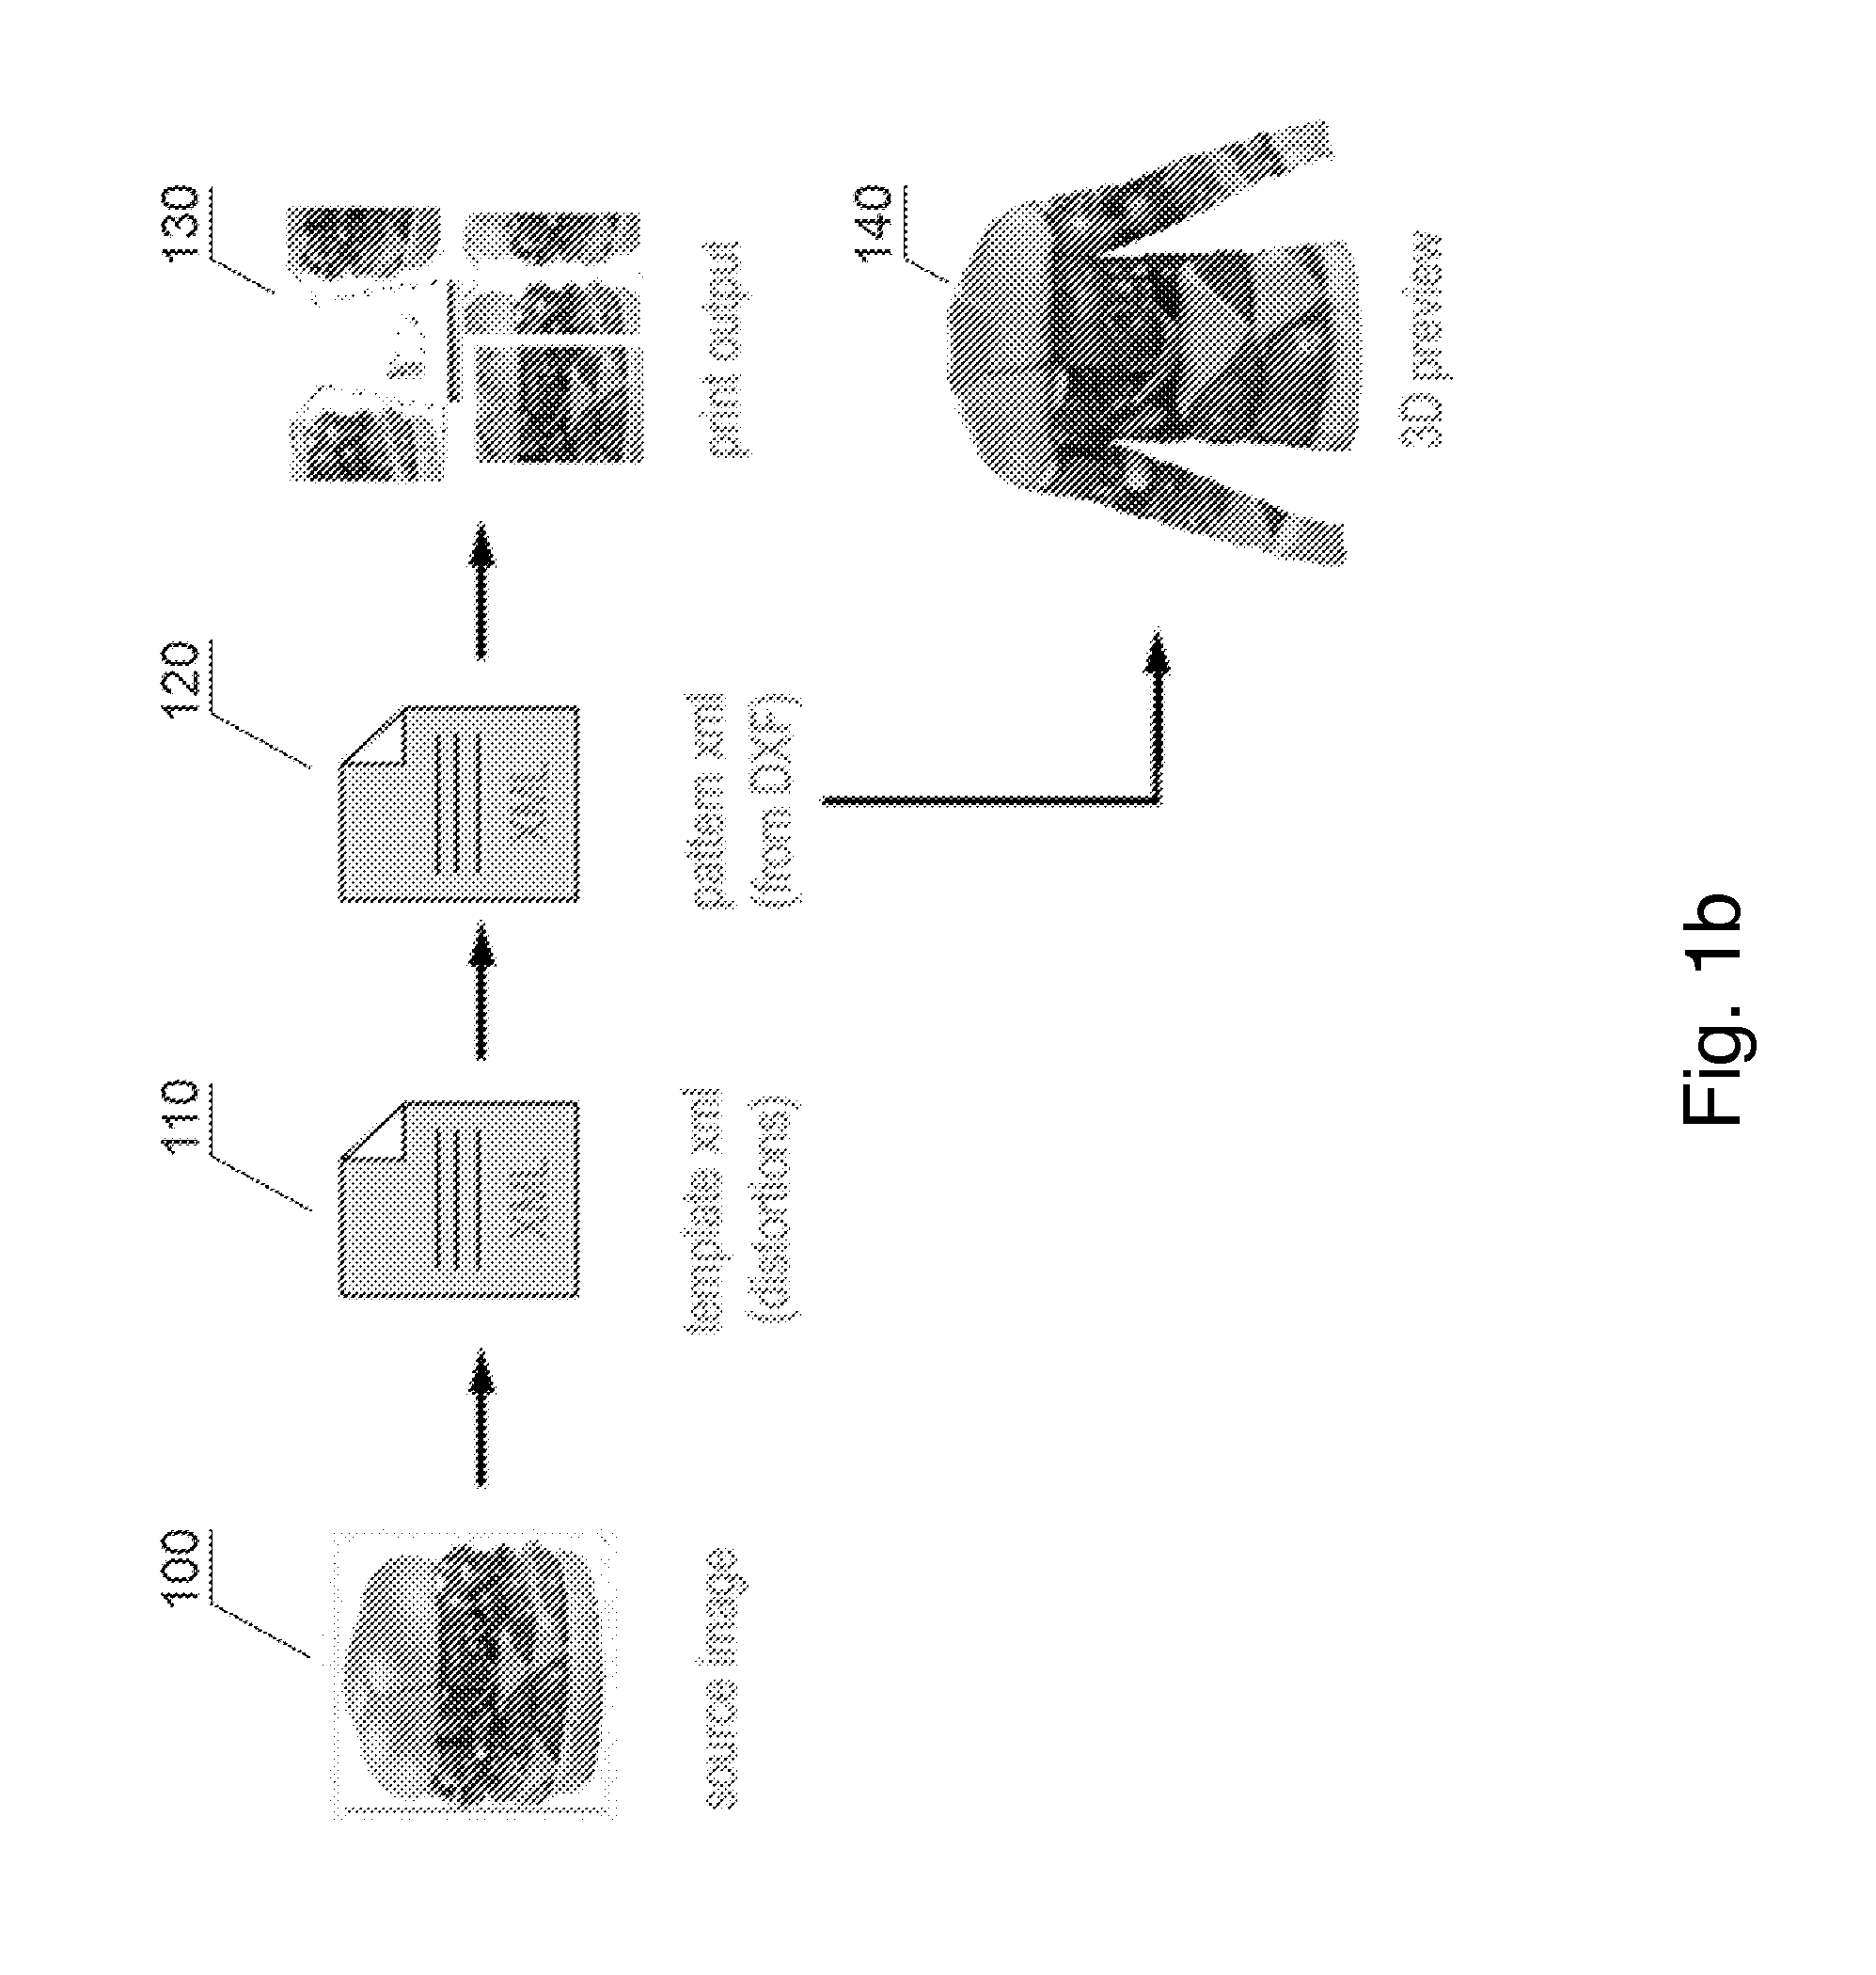 System and method for creating on-demand products